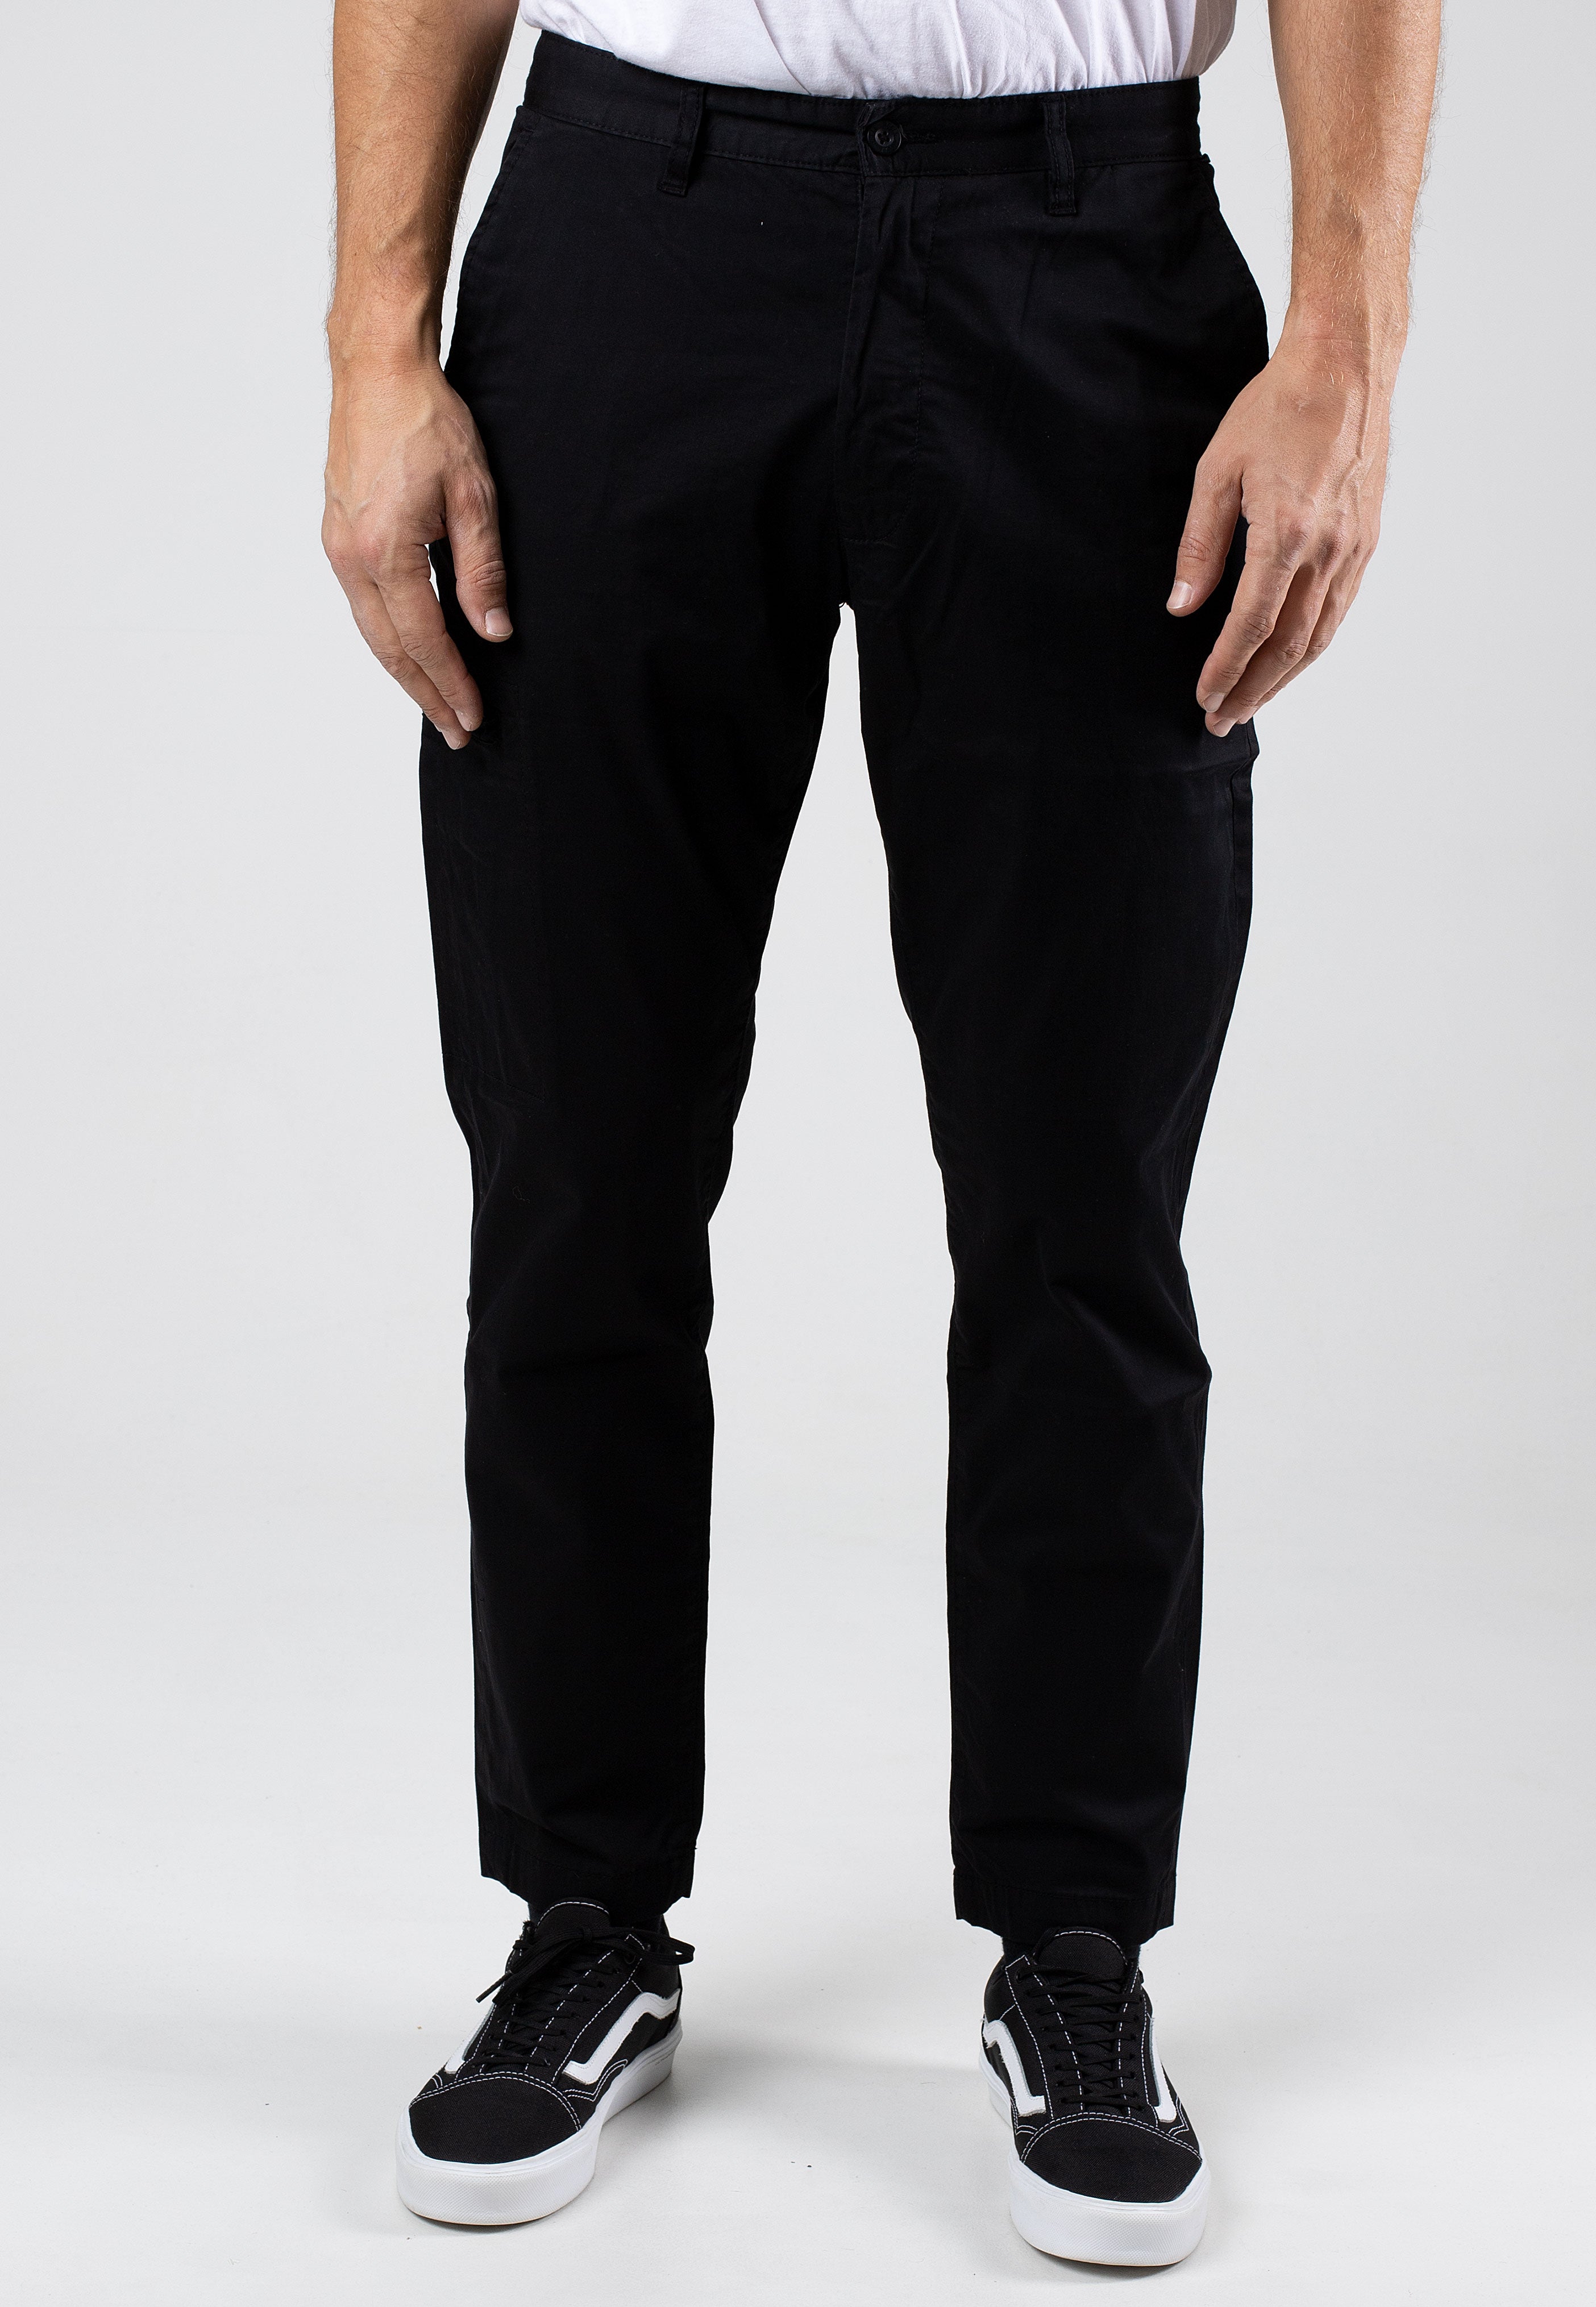 REELL - Crater Chino Deep Black - Pants